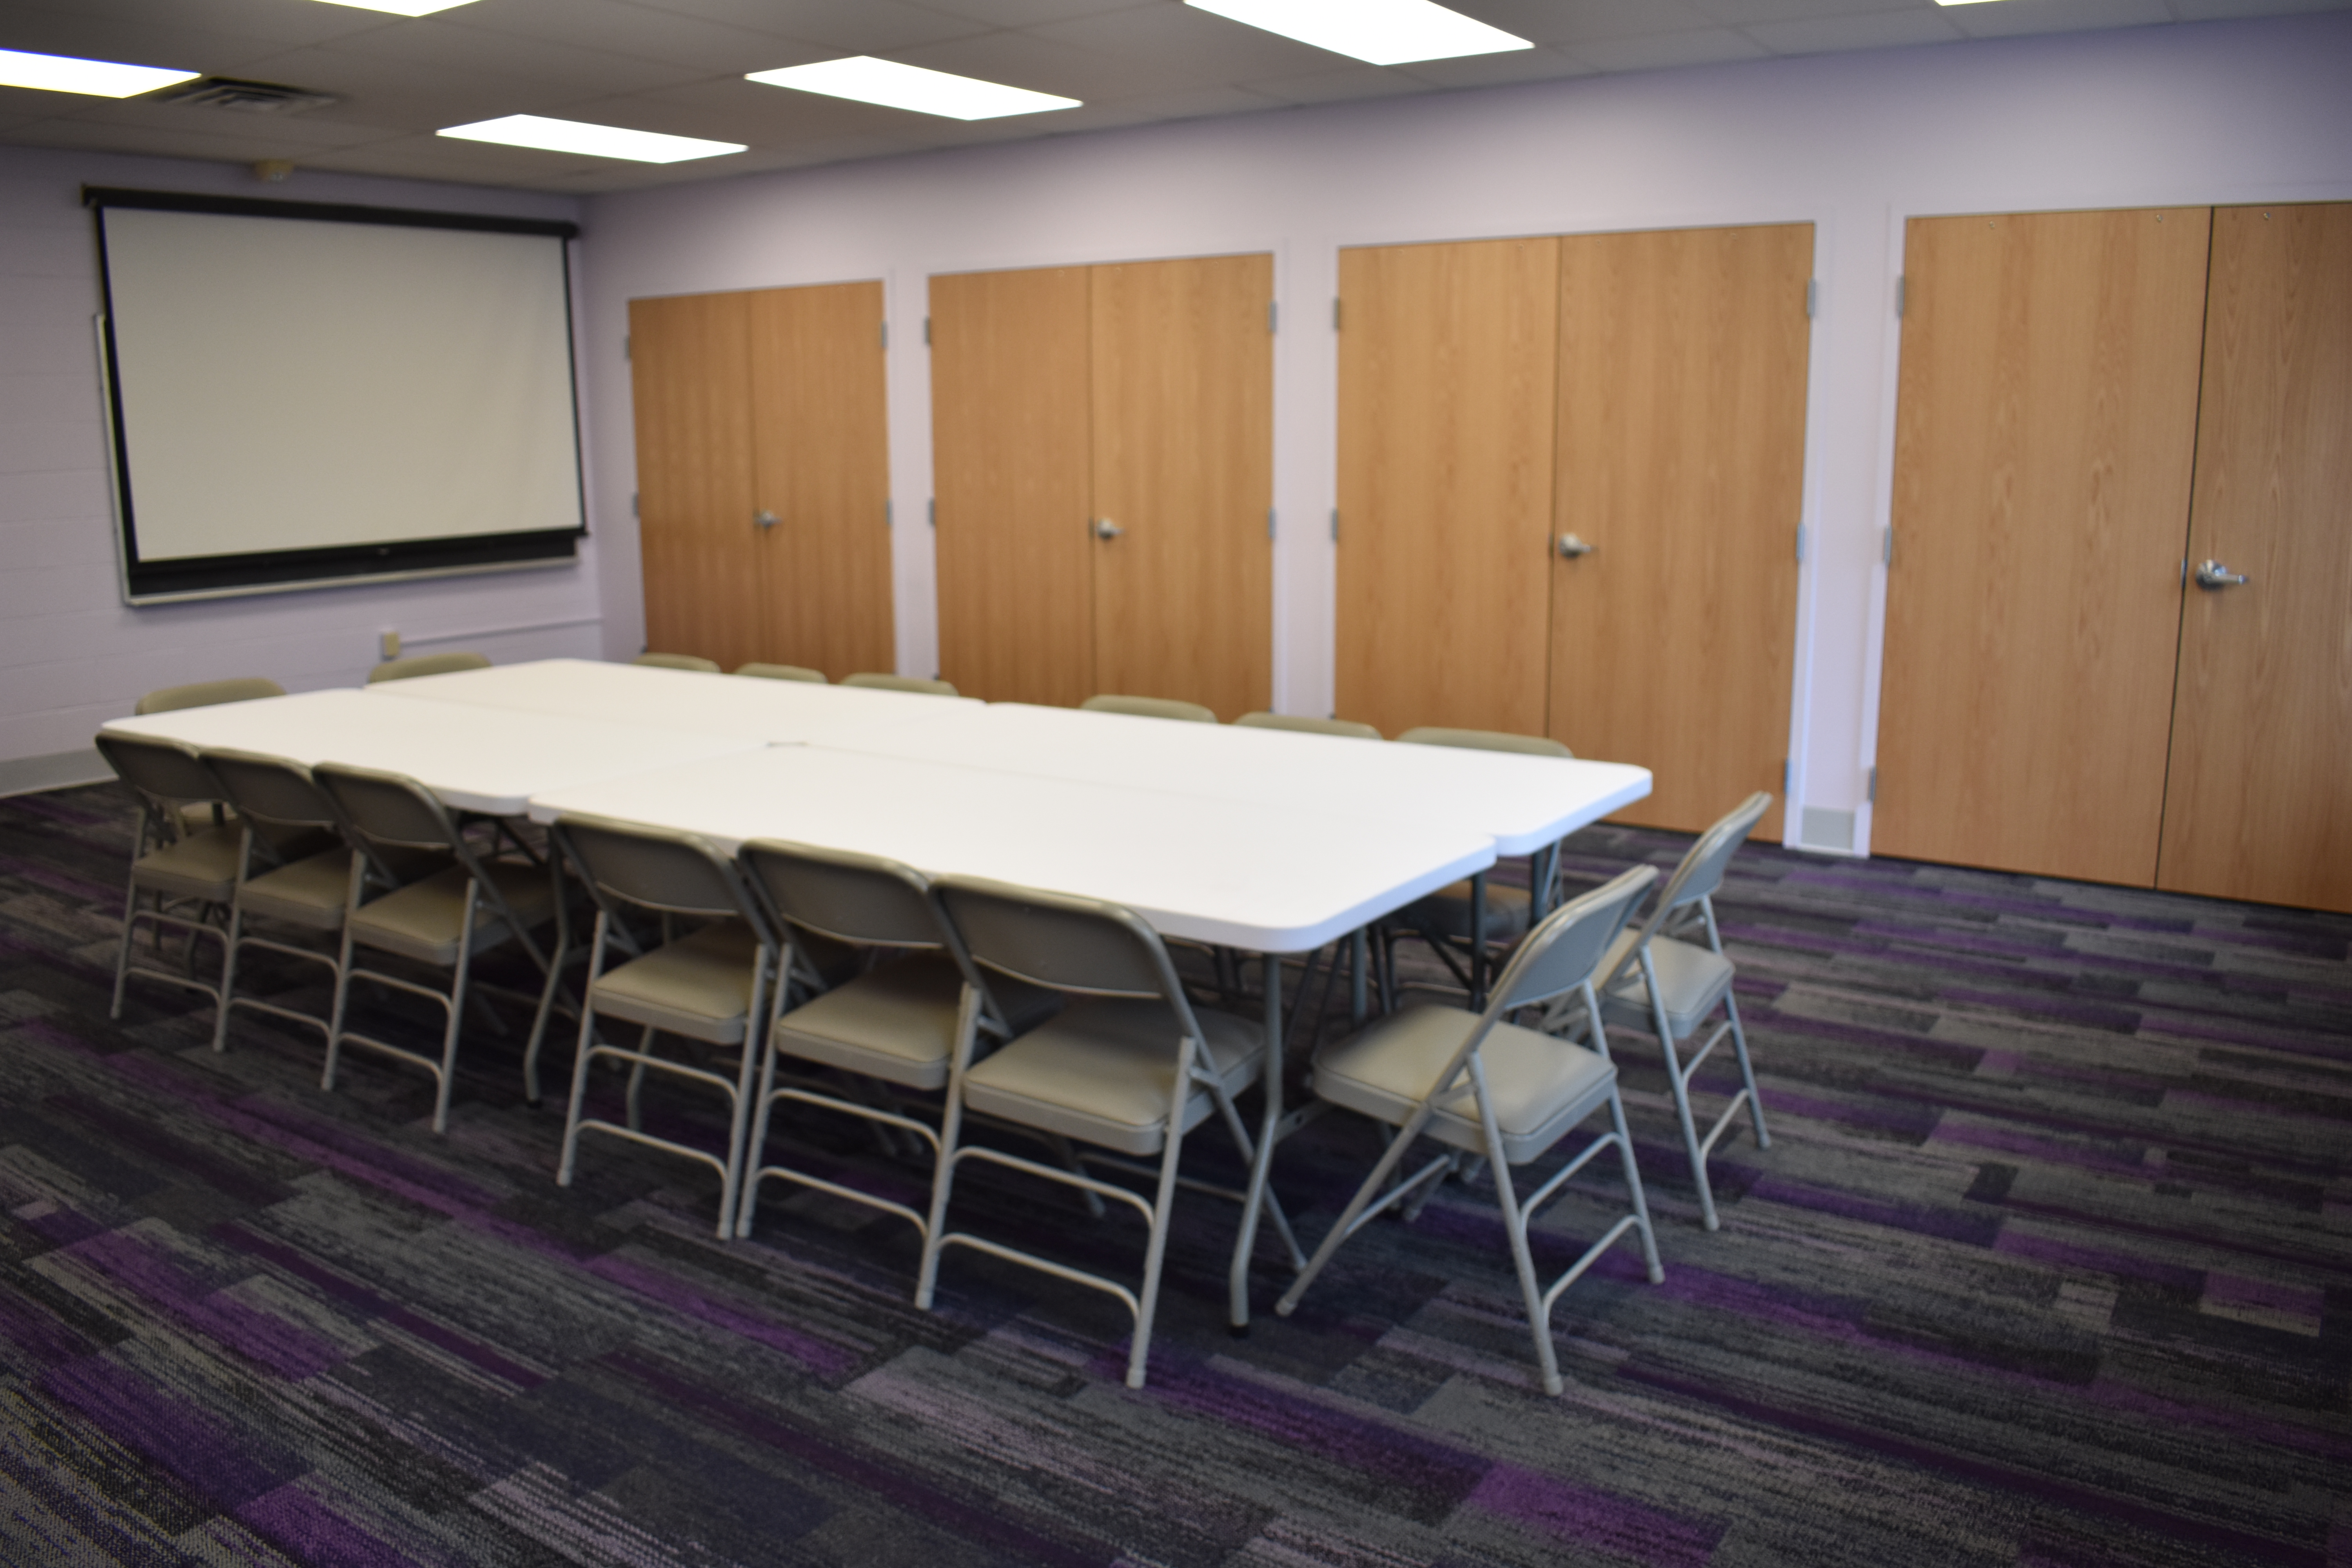 Photo of Community Room with tables and chairs, closet doors, and projector screen.